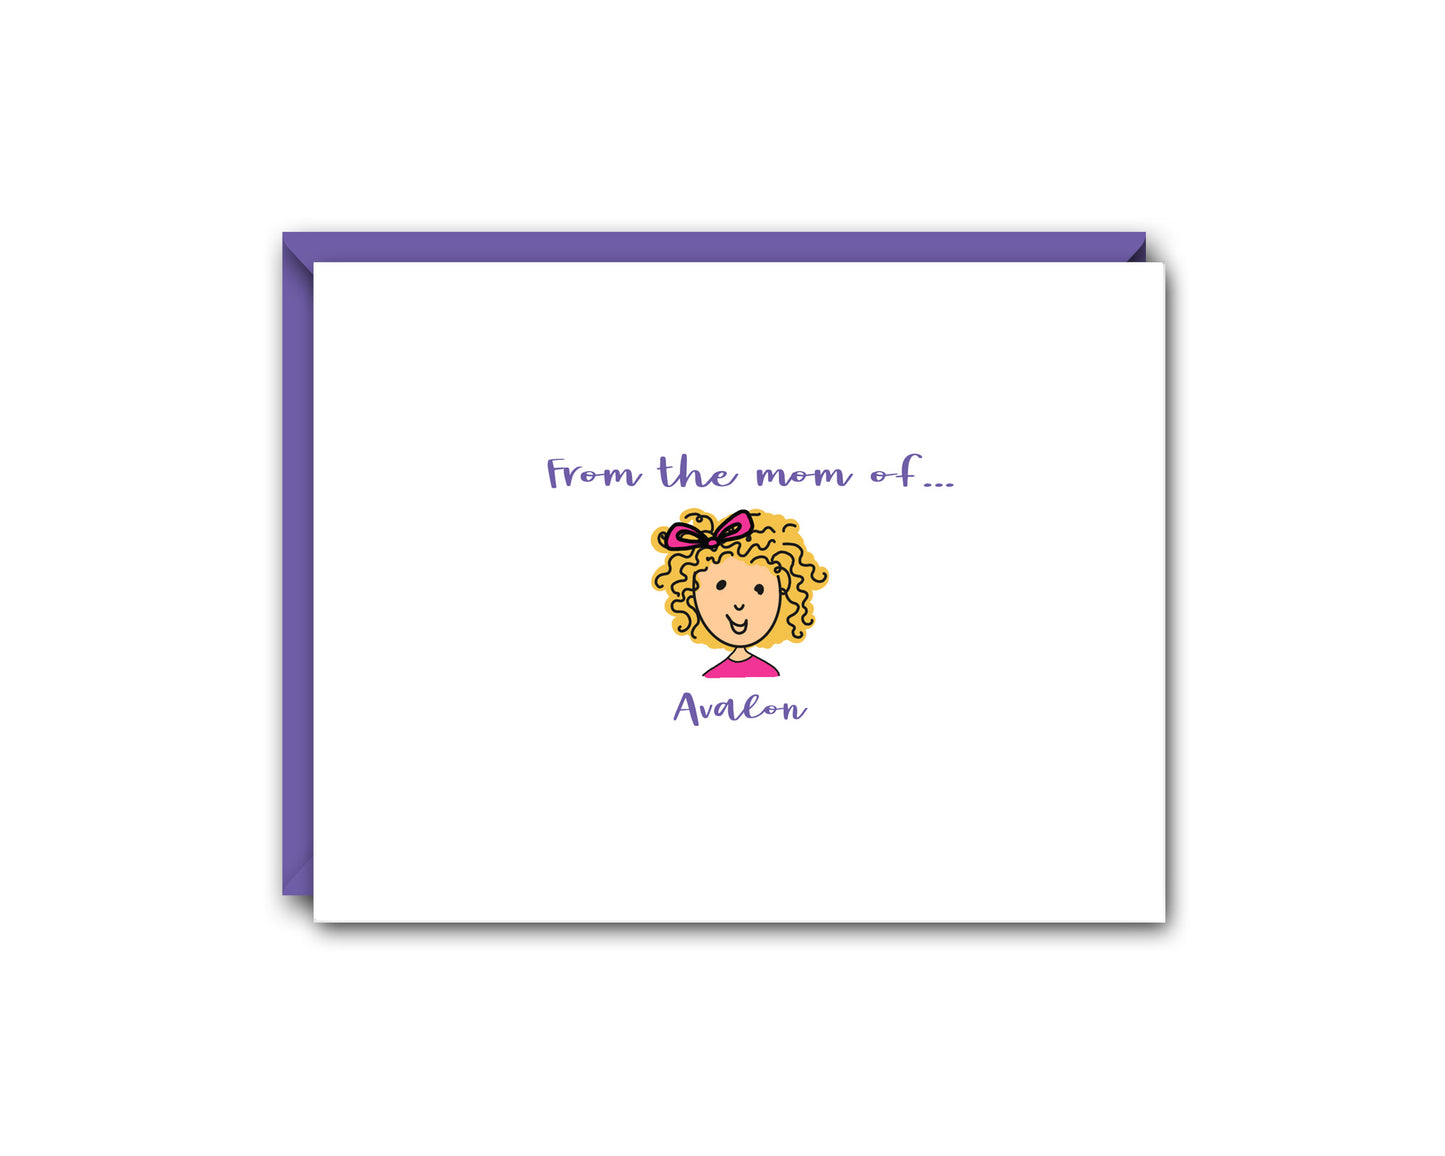 FROM THE MOM OF... ONE CHILD PERSONALIZED NOTE CARD SET